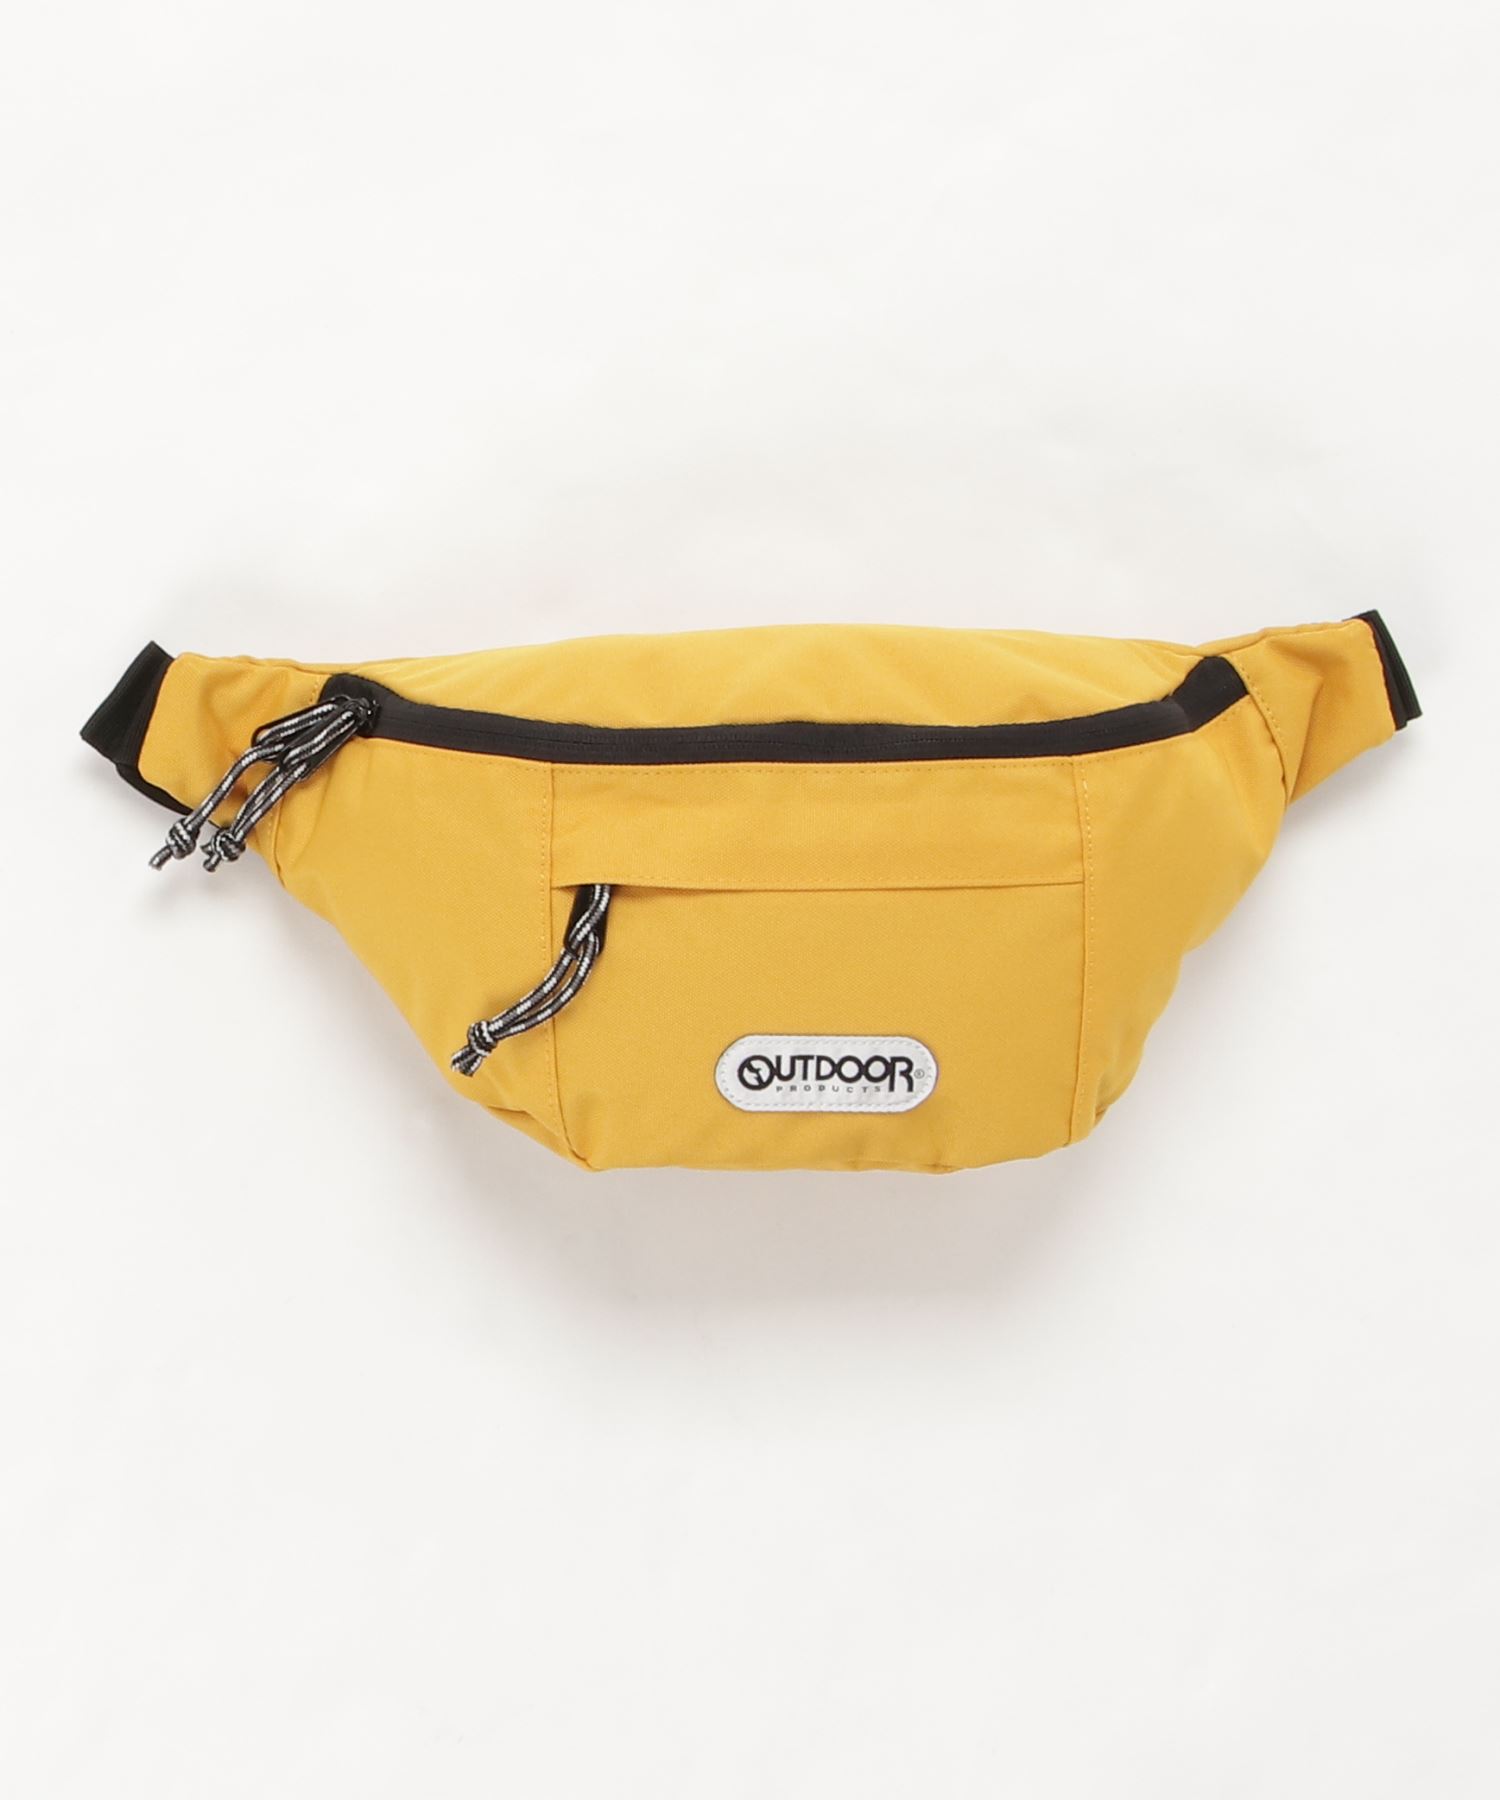 MAY HIP BAG ウエストポーチ OUTDOOR PRODUCTS│アウトドアプロダクツ（OUTDOOR PRODUCTS）公式通販サイト